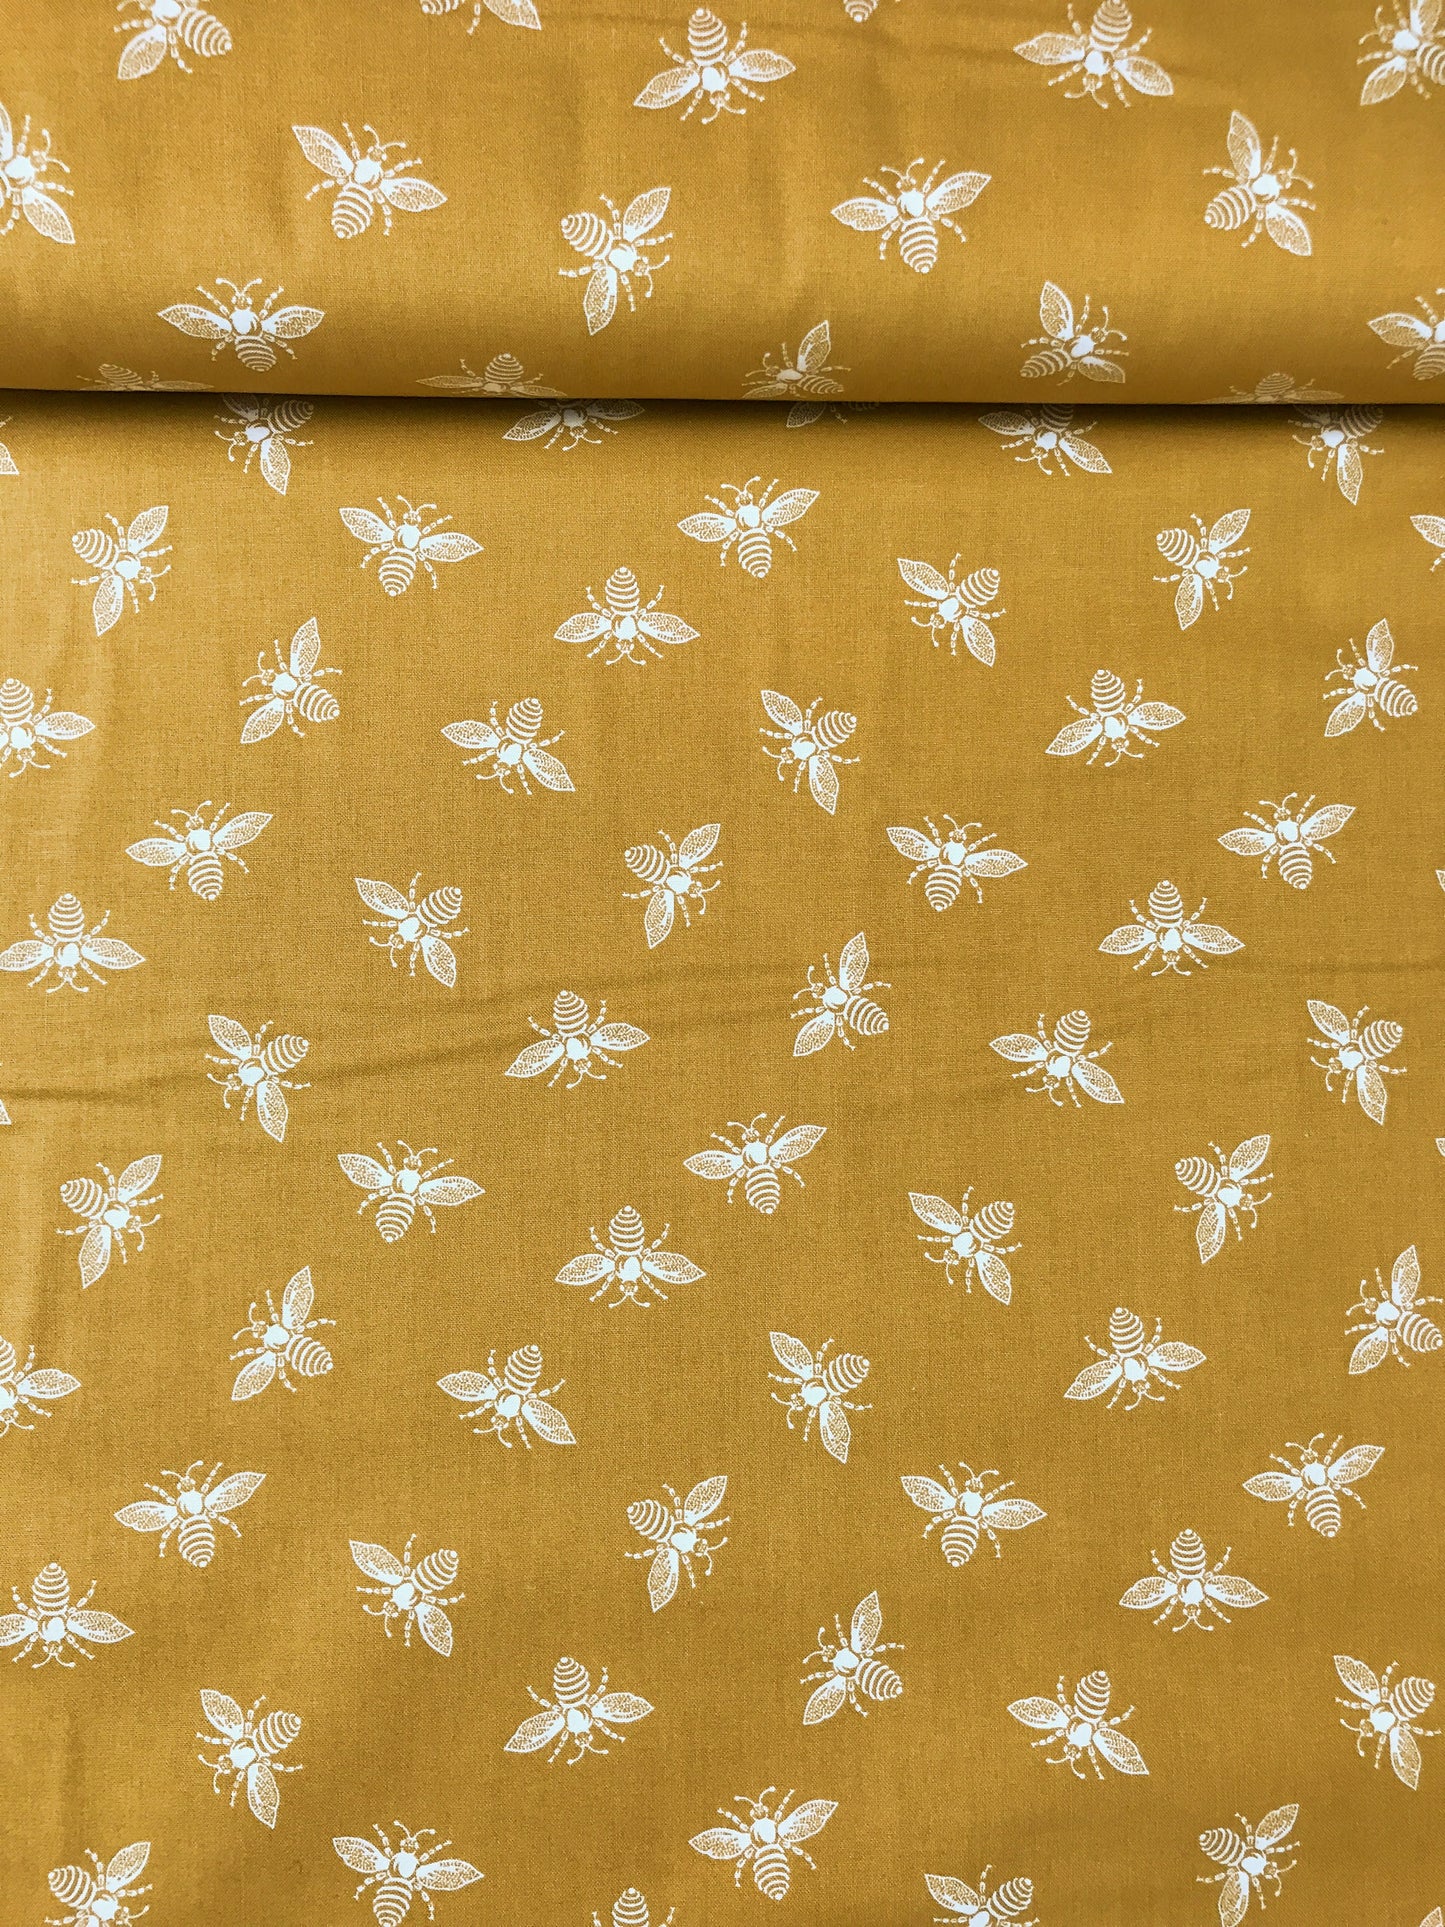 andover fabrics french bee renee nanneman french bee yellow quilters cotton Fabric Fetish